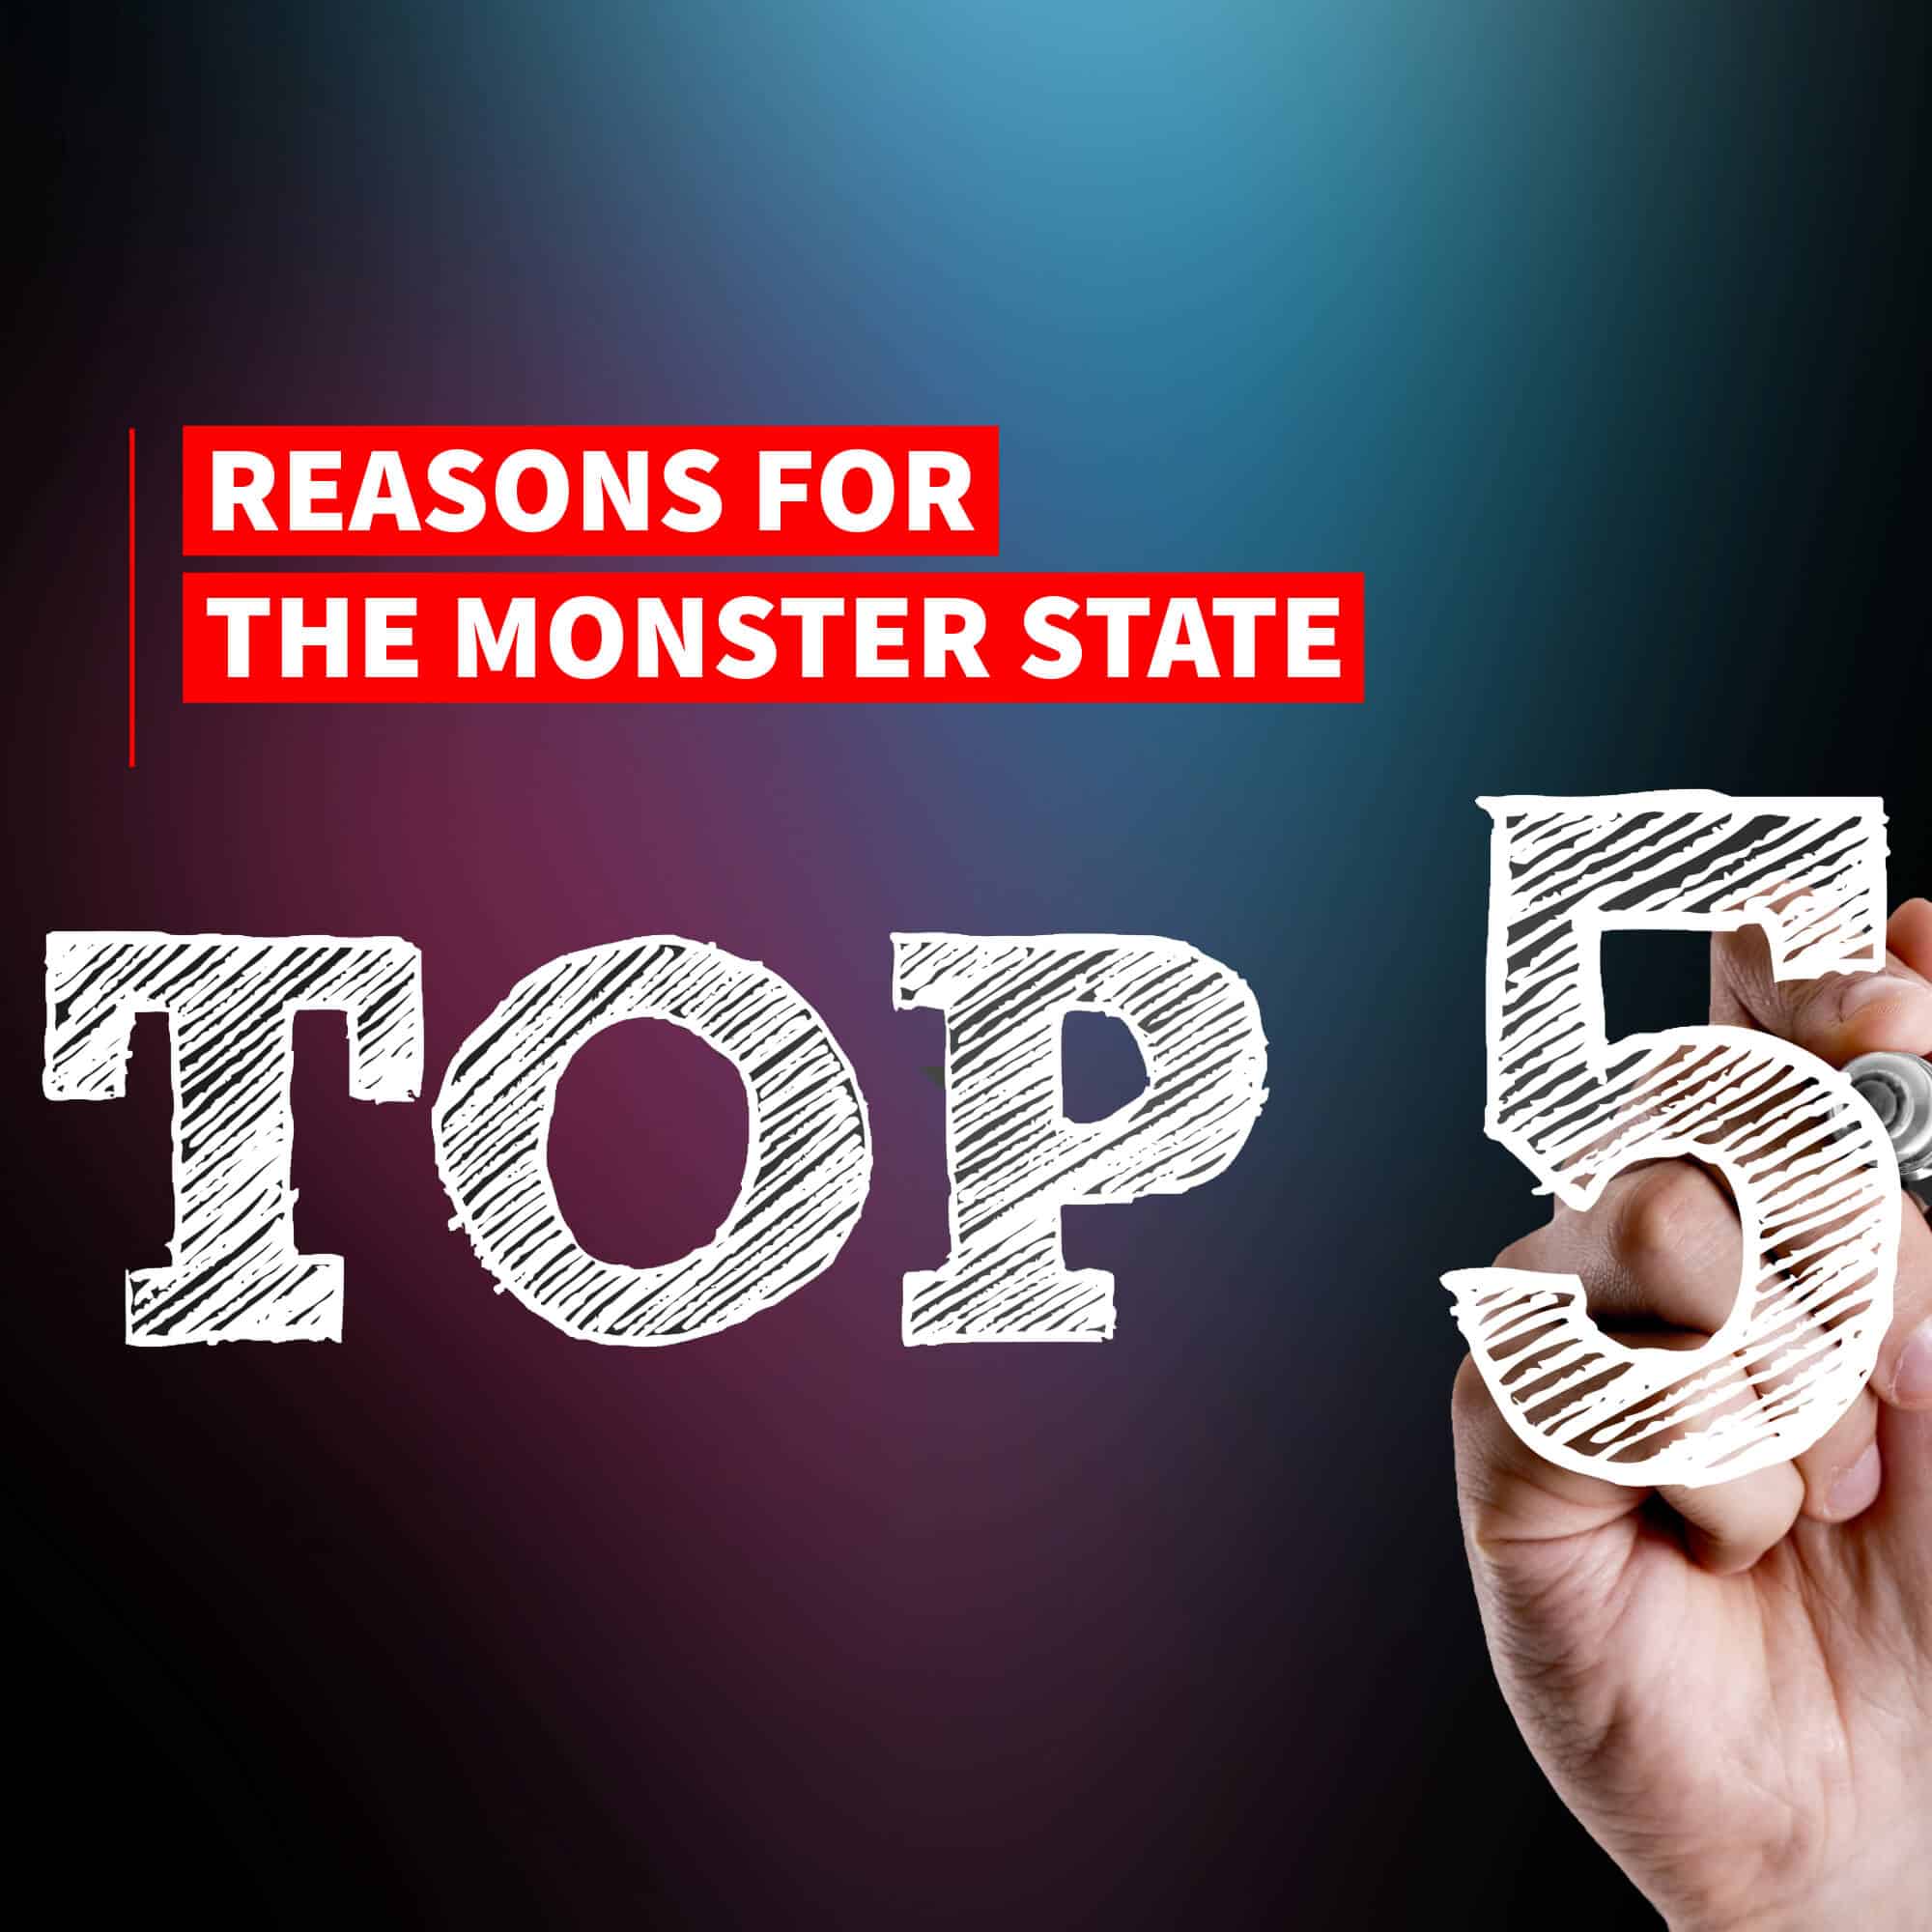 Top-5 Reasons for the Monster State